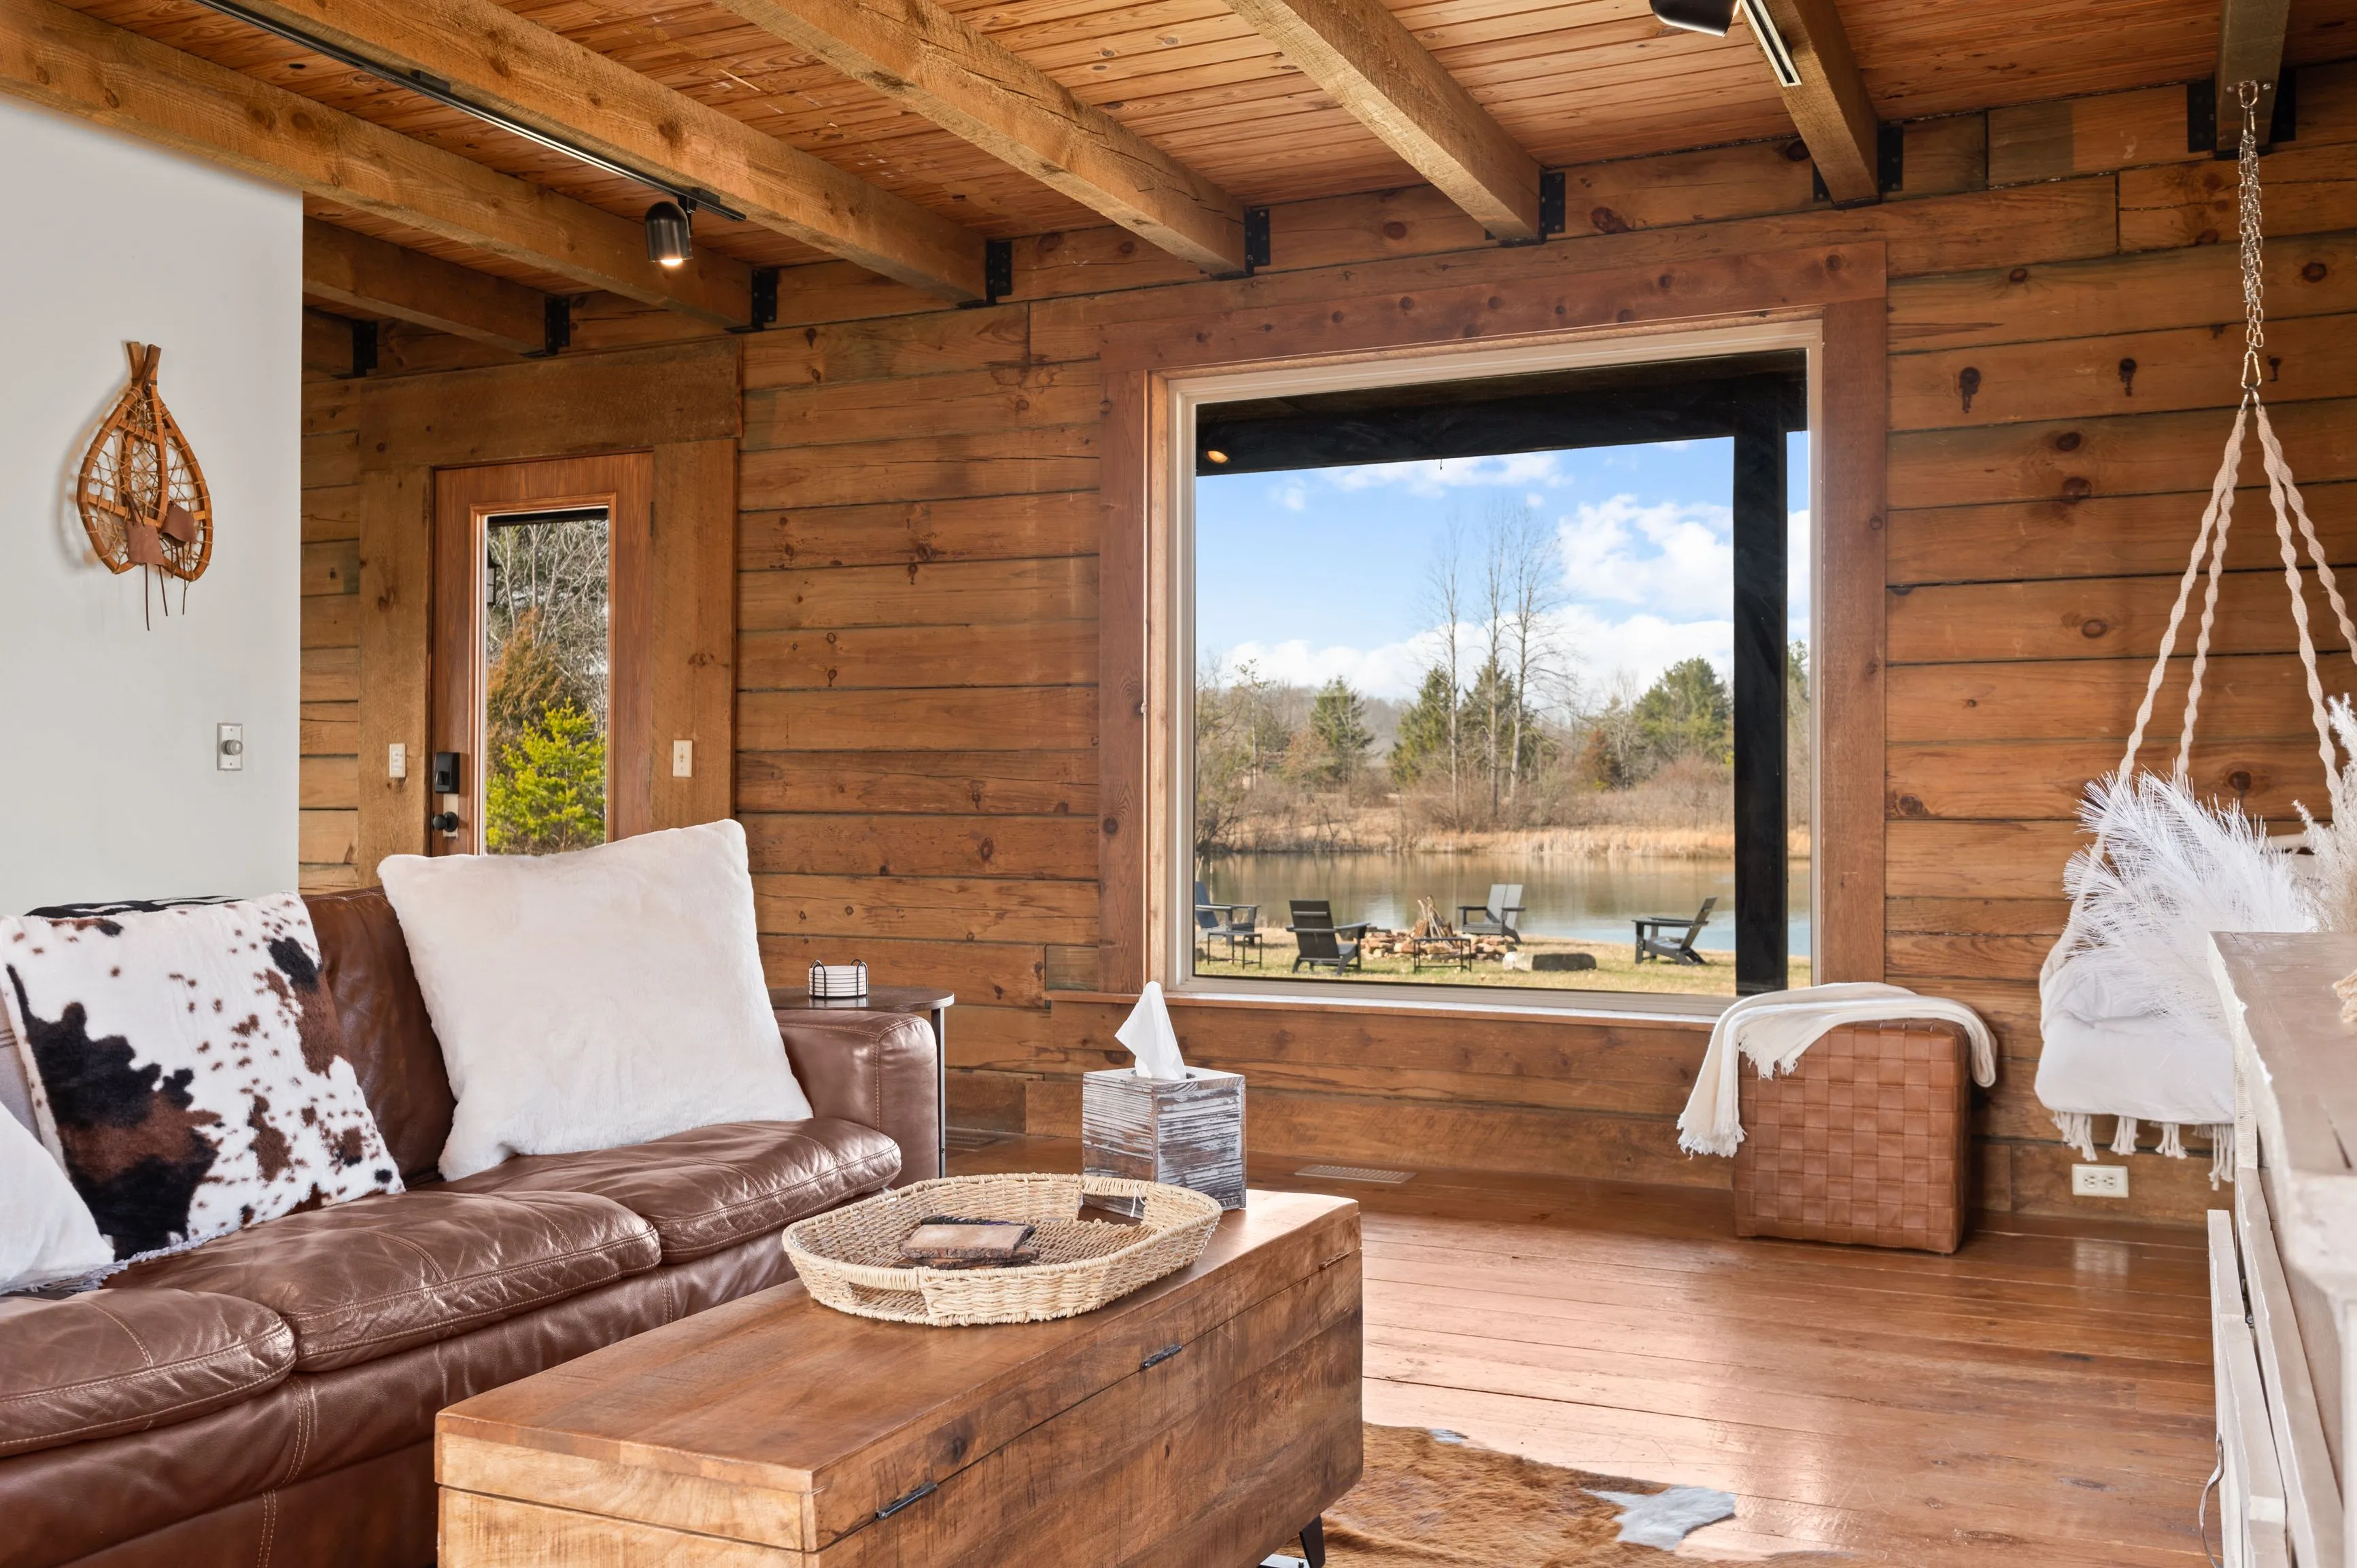 Cozy rustic living room with a leather sofa, wood coffee table, and large window overlooking a scenic outdoor area with a pond.